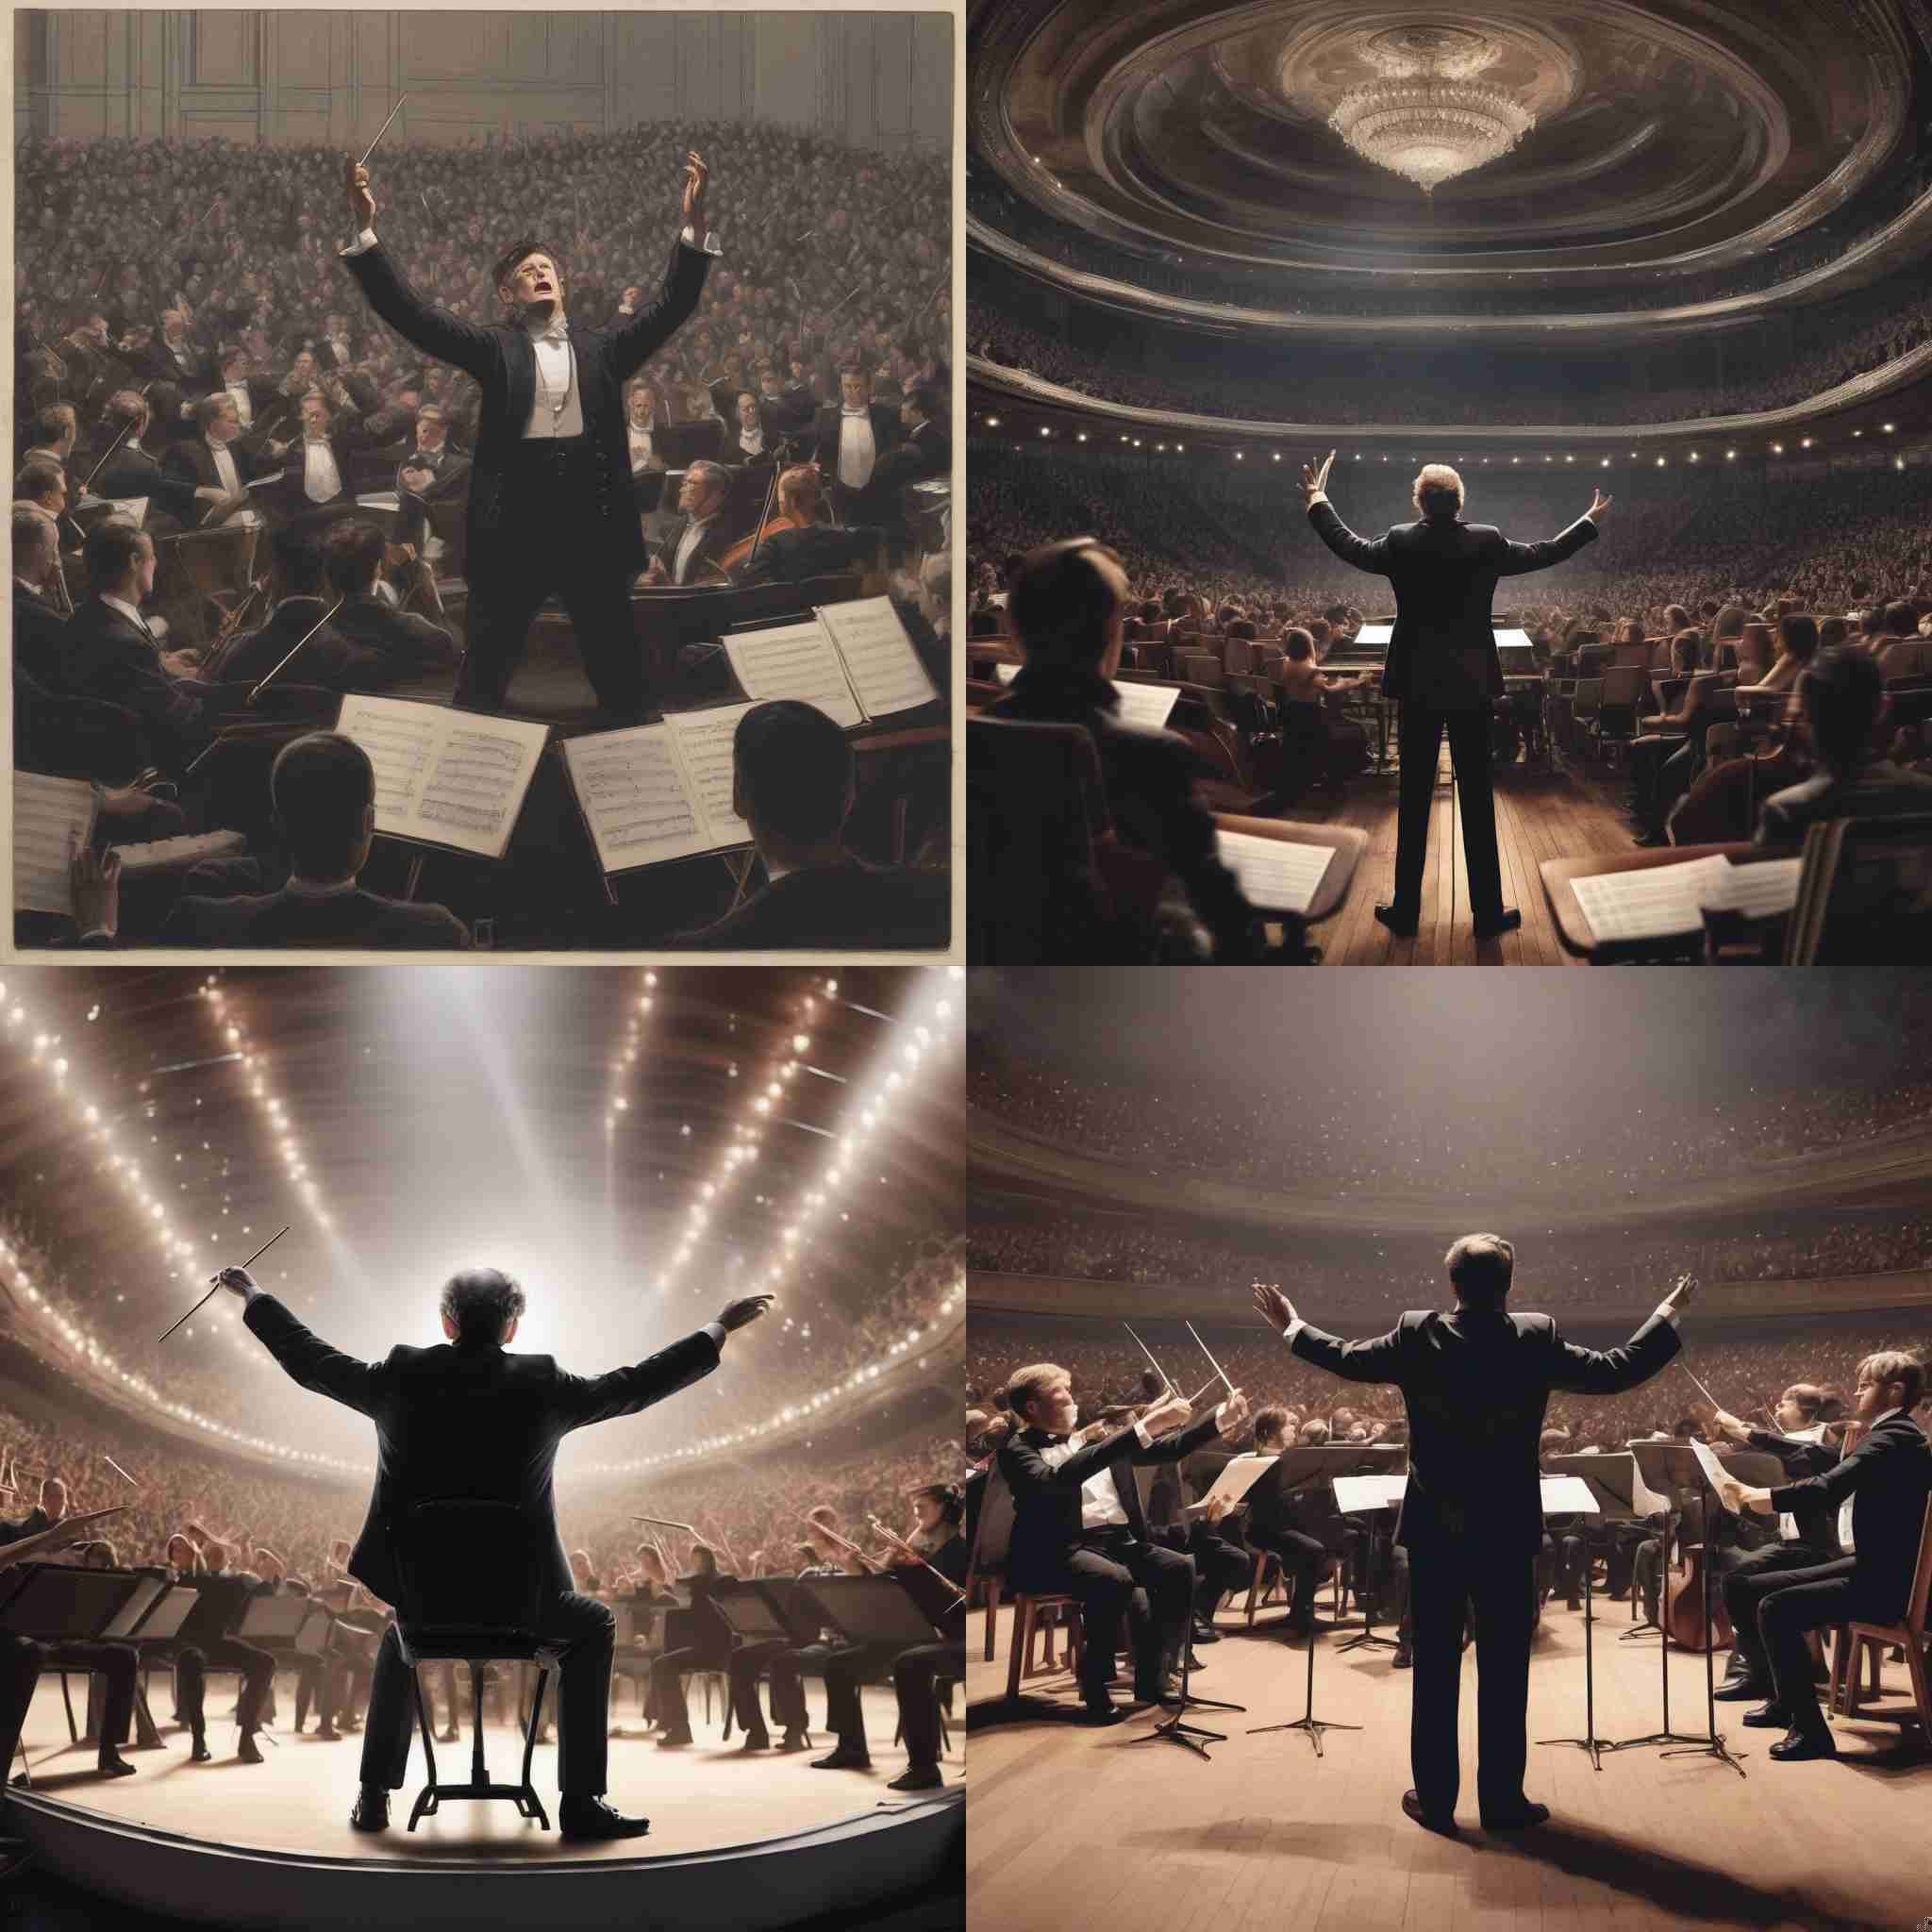 A conductor in the middle of the concert